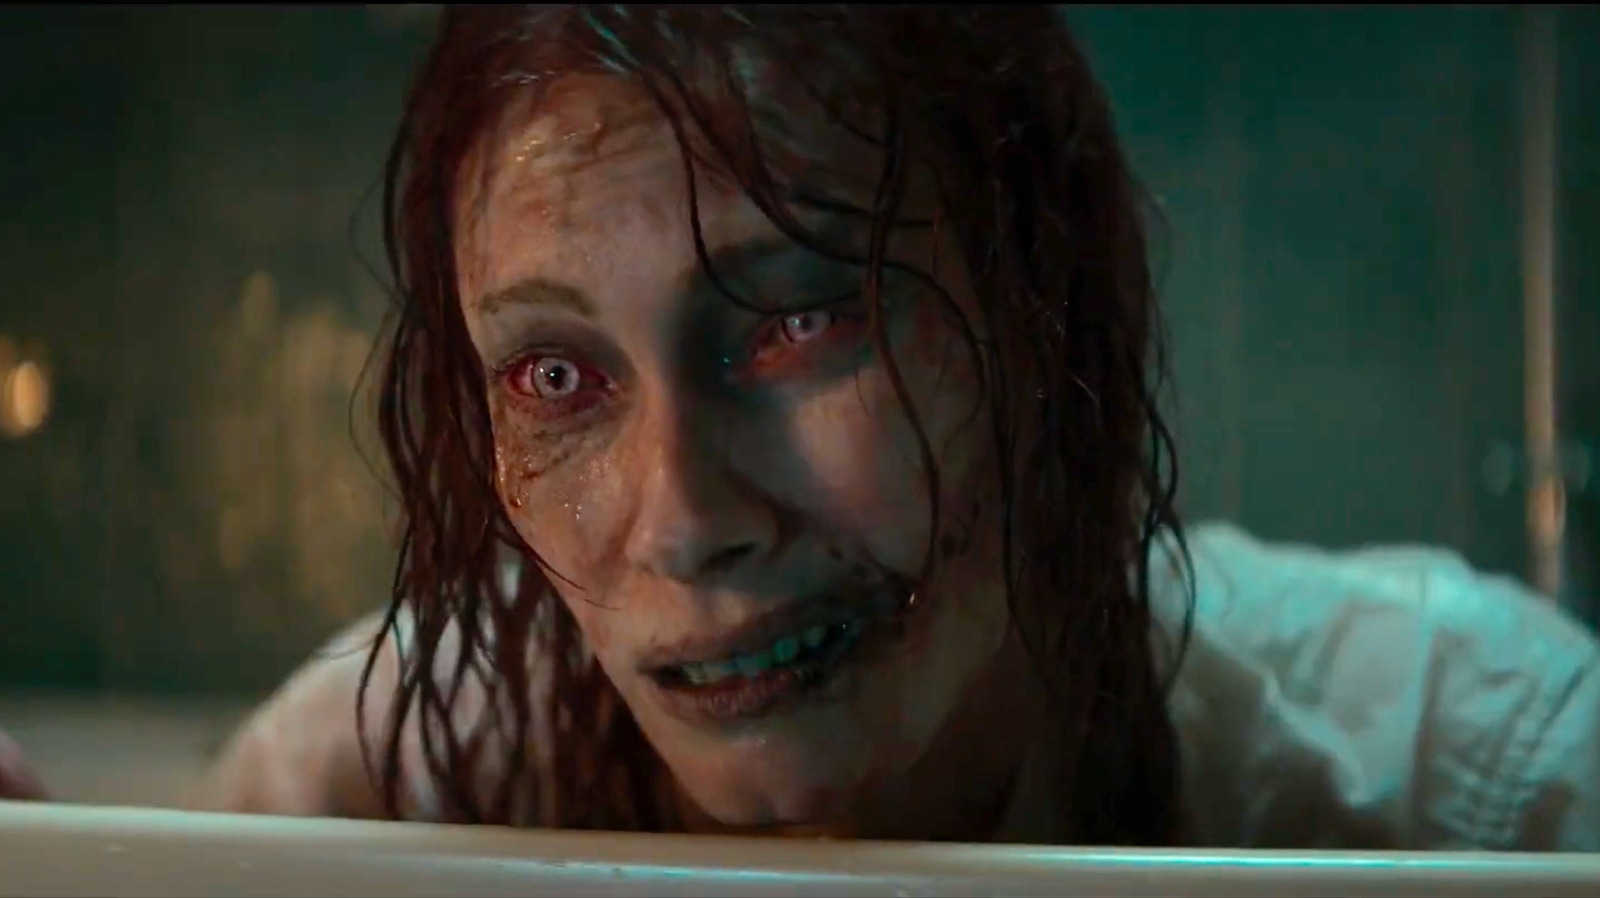 Movie Review: “Evil Dead Rise” and we are not amused